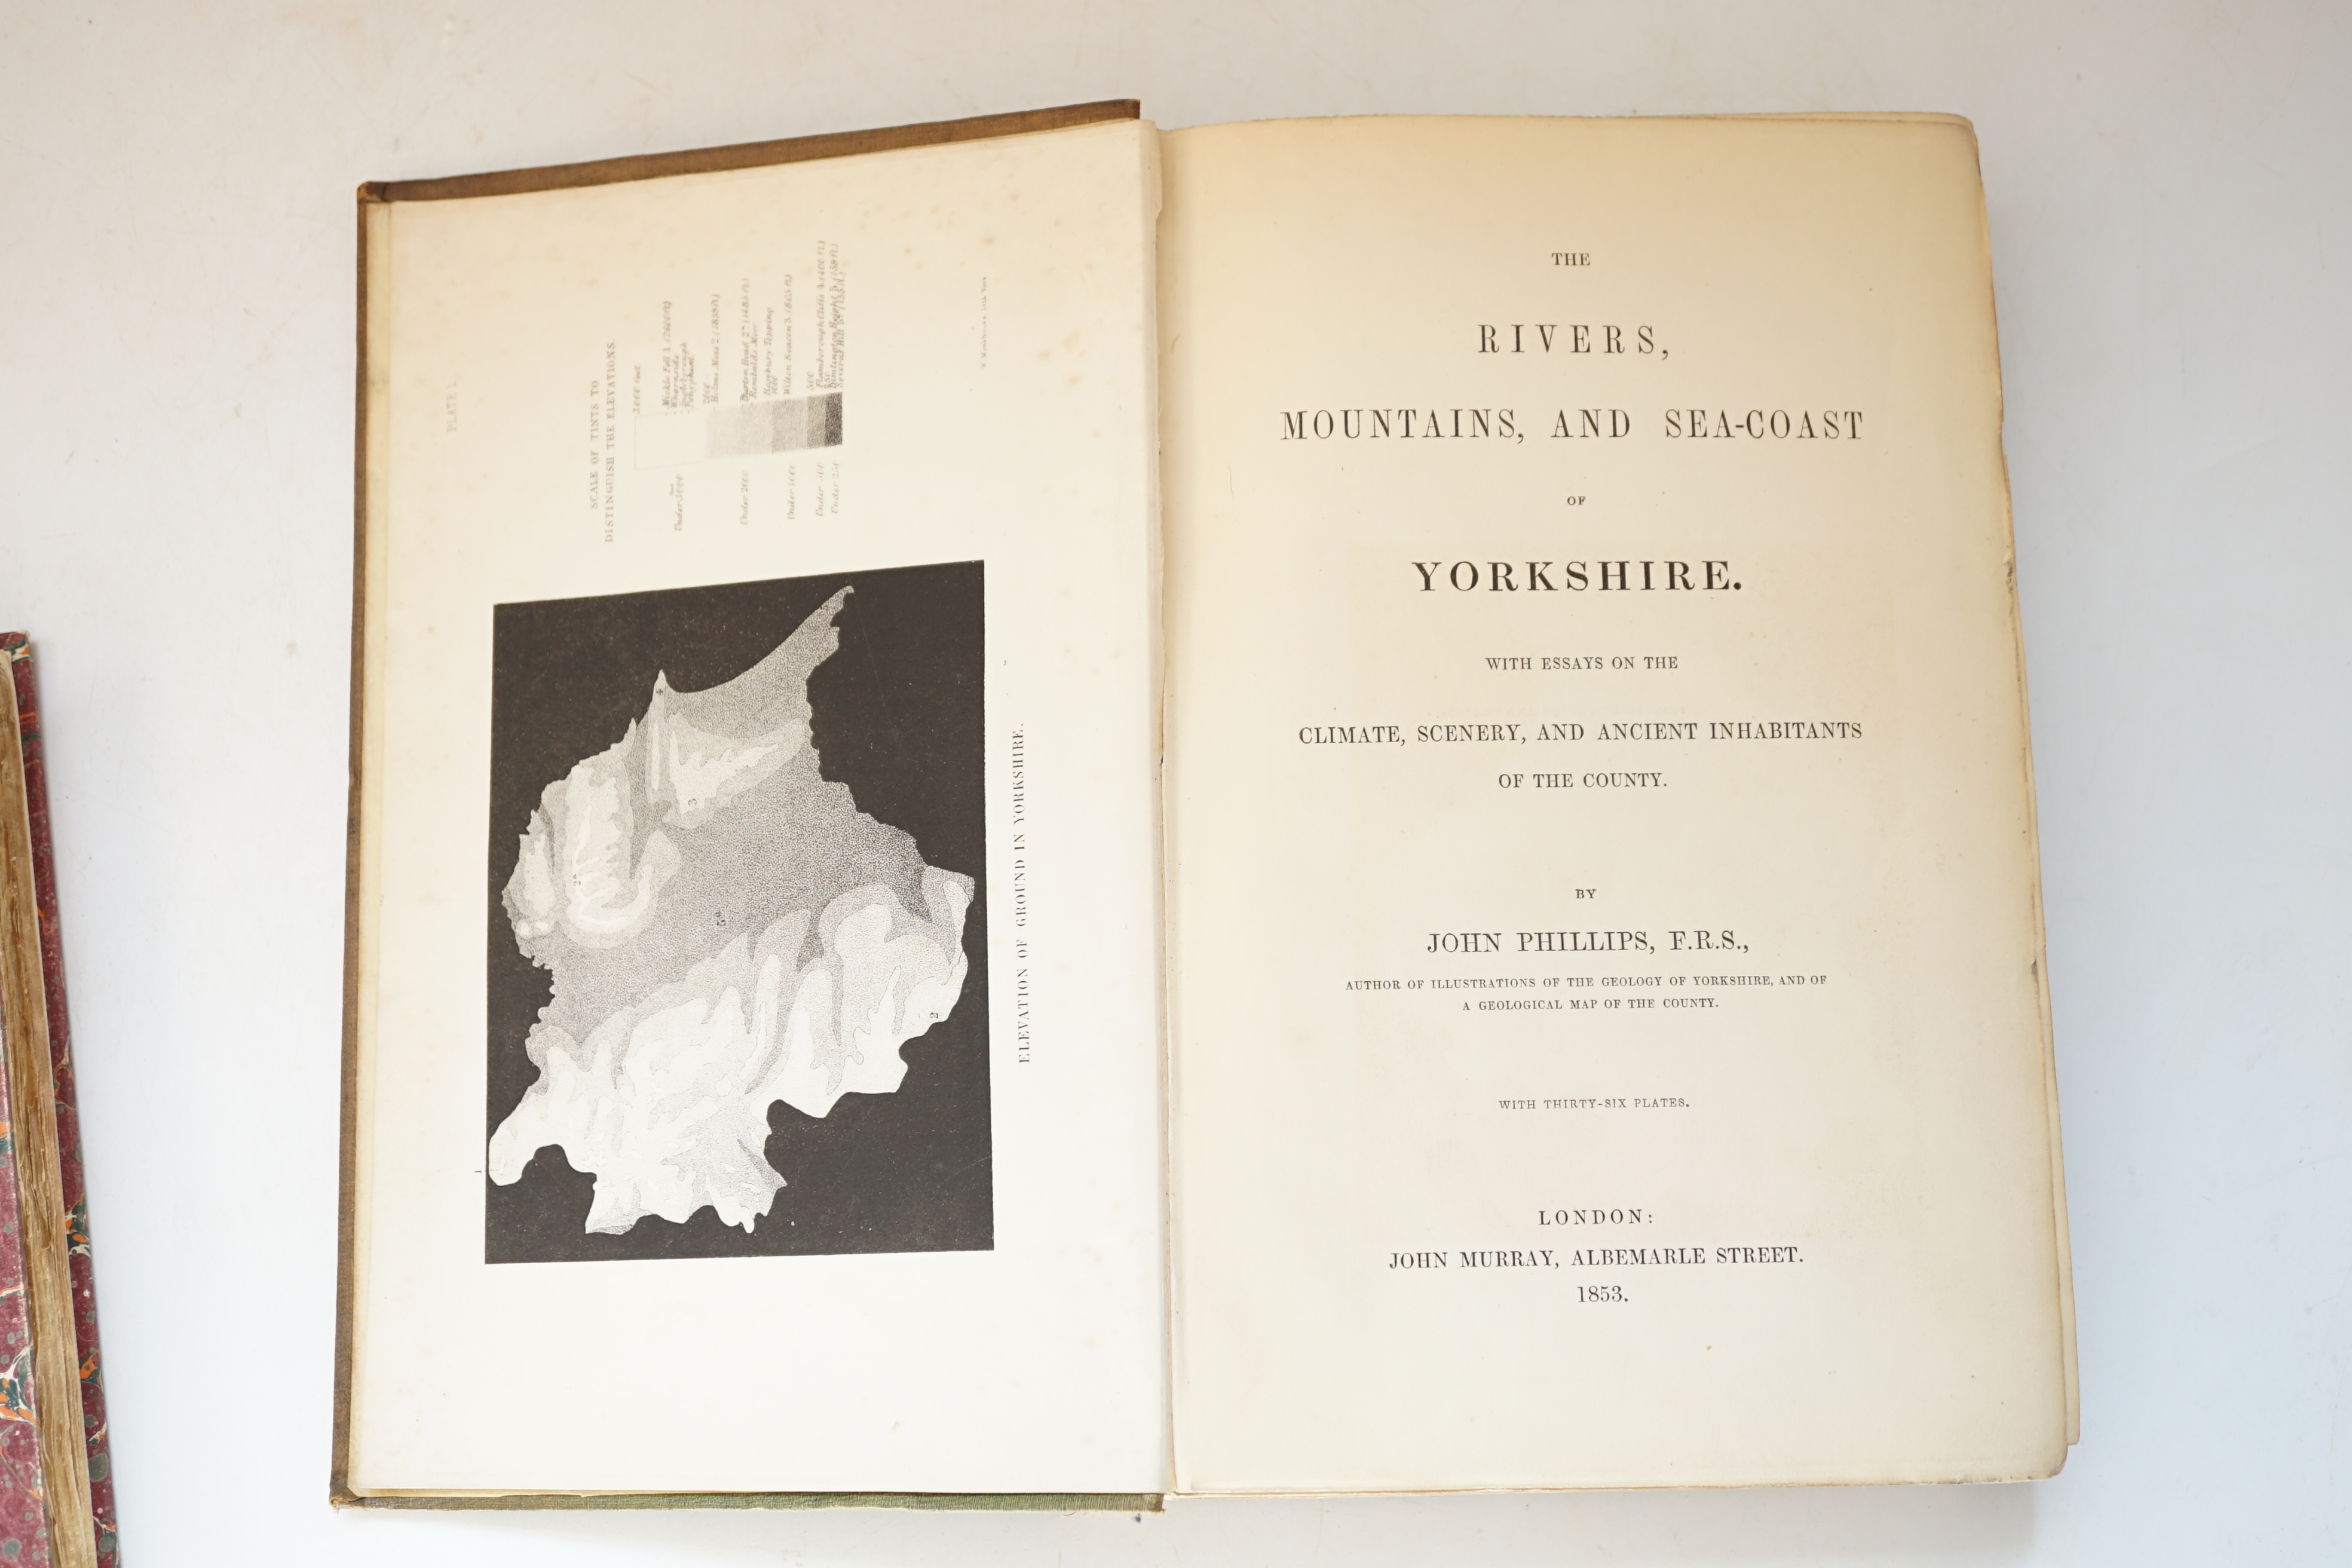 Phillips, John - Two Works - The Rivers, Mountains, and Sea-Coast of Yorkshire. With Essays on the Climate, Scenery and Ancient Inhabitants of the County, 1st ed., 36 lithographed plates, 16pp. publisher's list at end, d